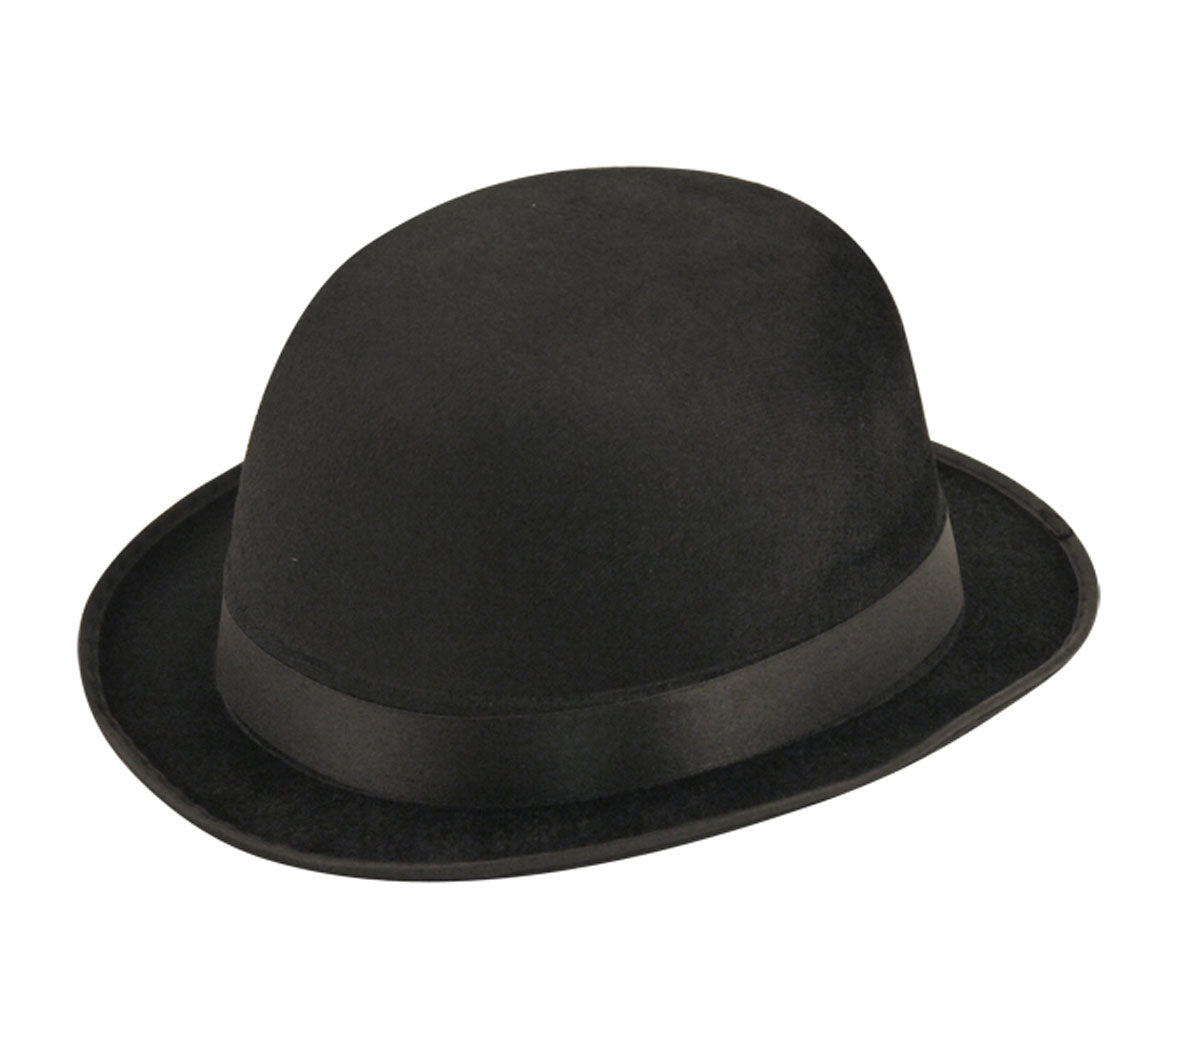 Classic Black Bowler Hat with Red Bow Tie, White Socks, and Gloves - Complete Costume Set for Timeless Style